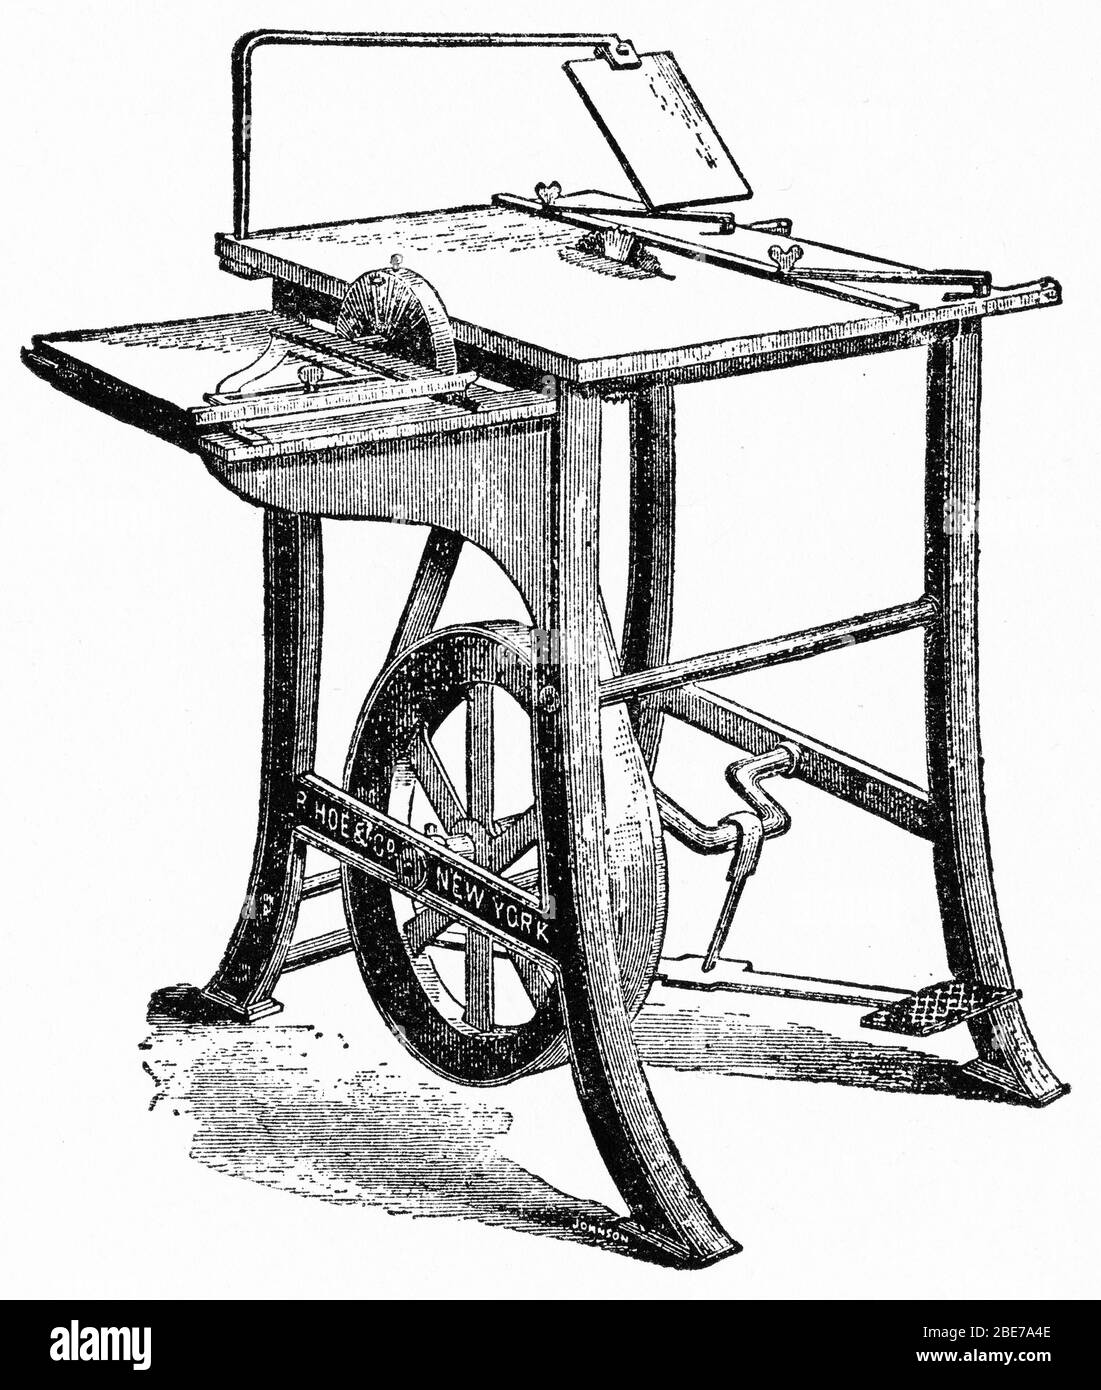 Engraving of a 19th century foot operated circular saw Stock Photo